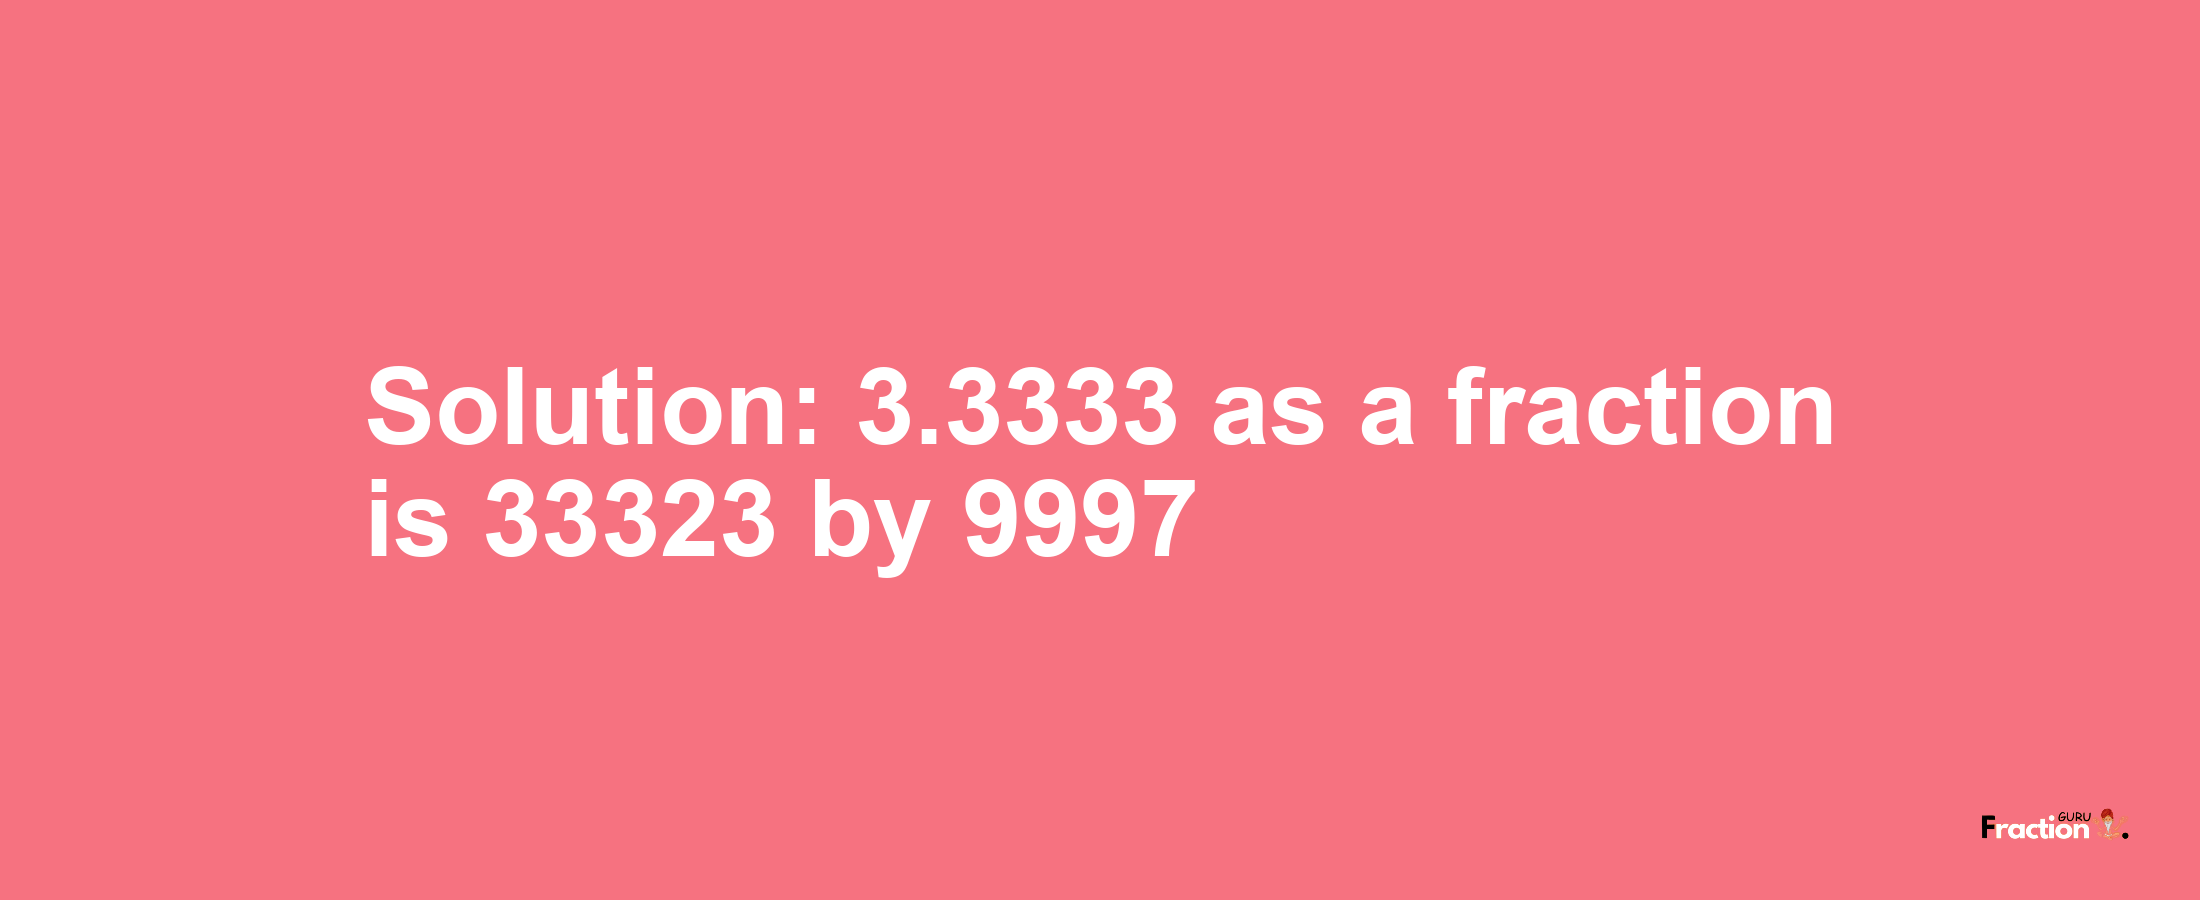 Solution:3.3333 as a fraction is 33323/9997